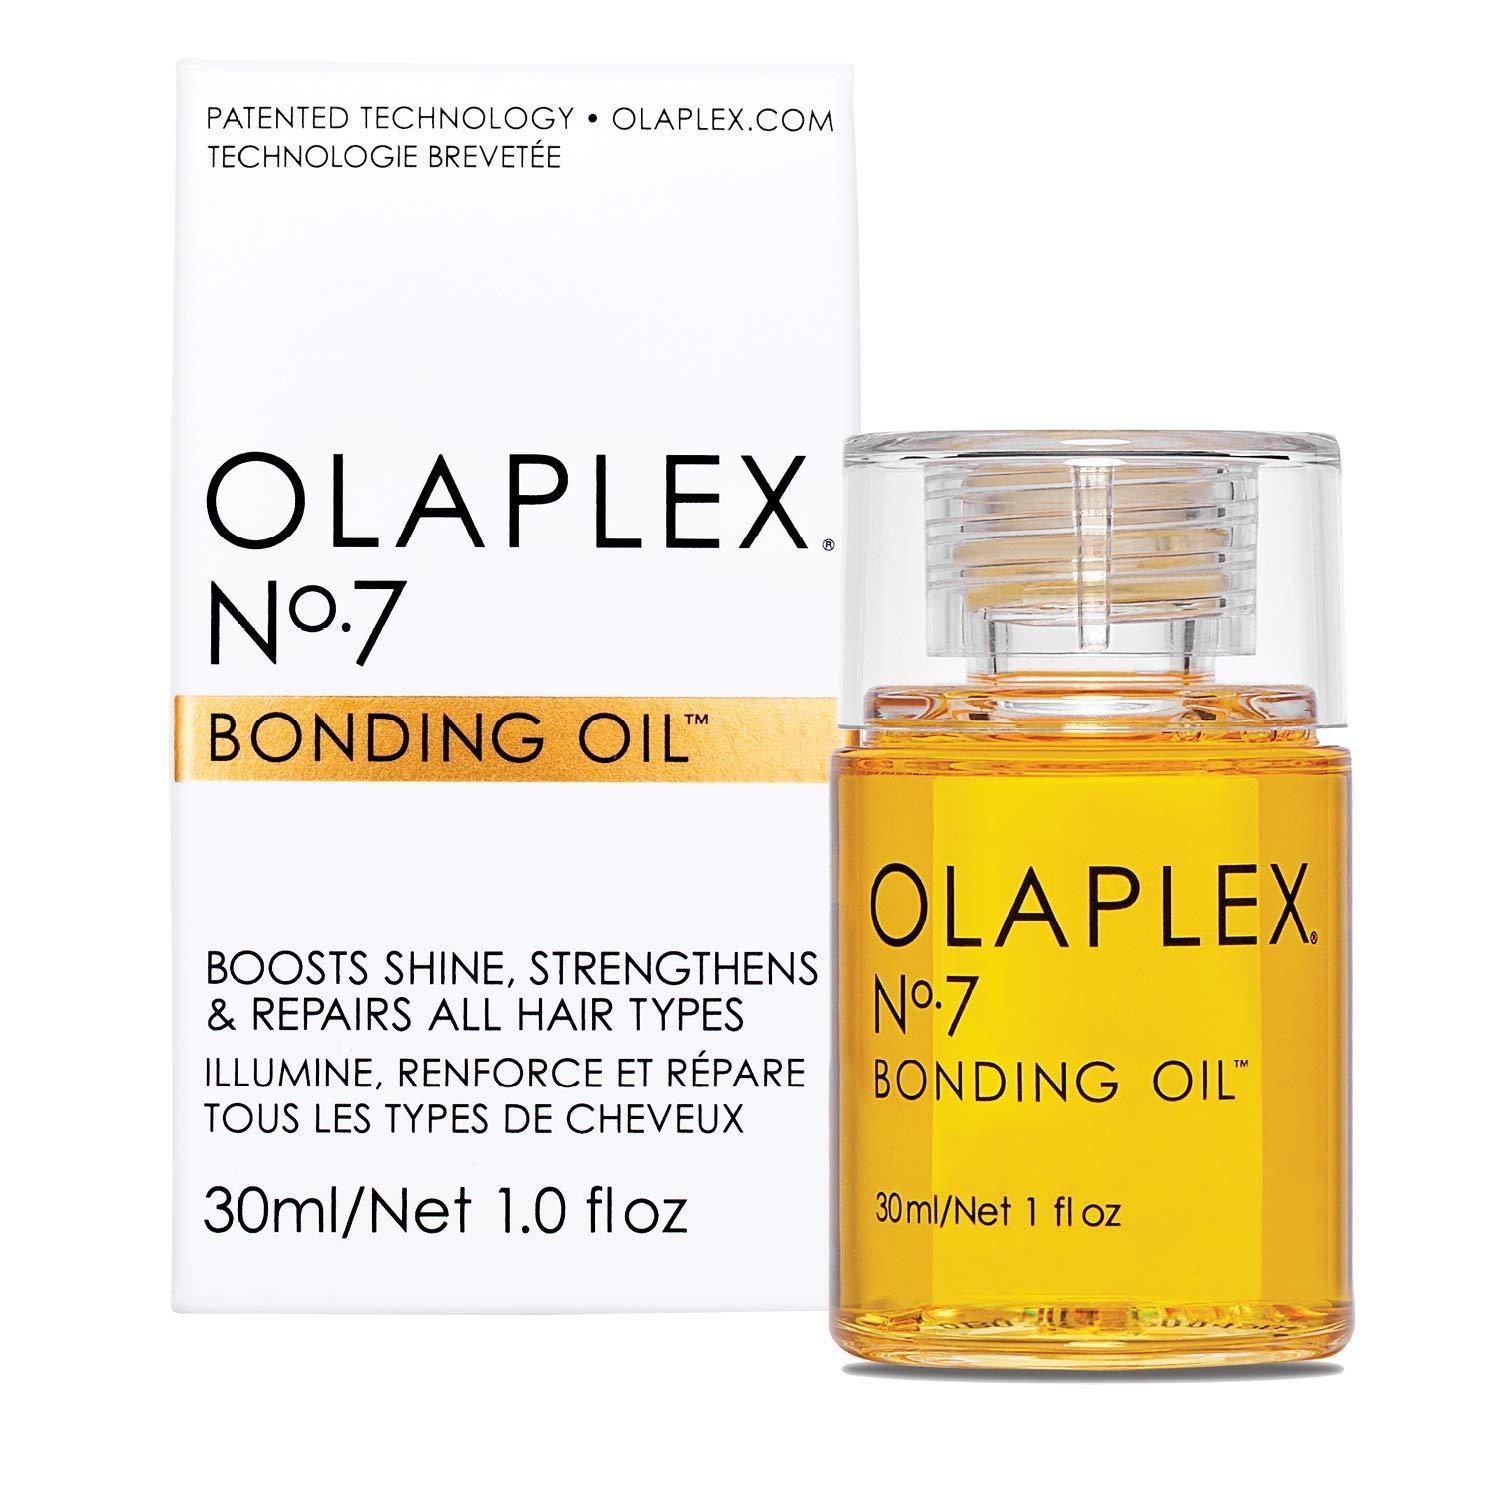 OLAPLEX 7 - BONDING OIL 30ML A highly-concentrated, weightless reparative styling oil. Dramatically increase shine, softness, and color vibrancy. Minimizes fly-aways and frizz. Provides heat protection of up to 450°.